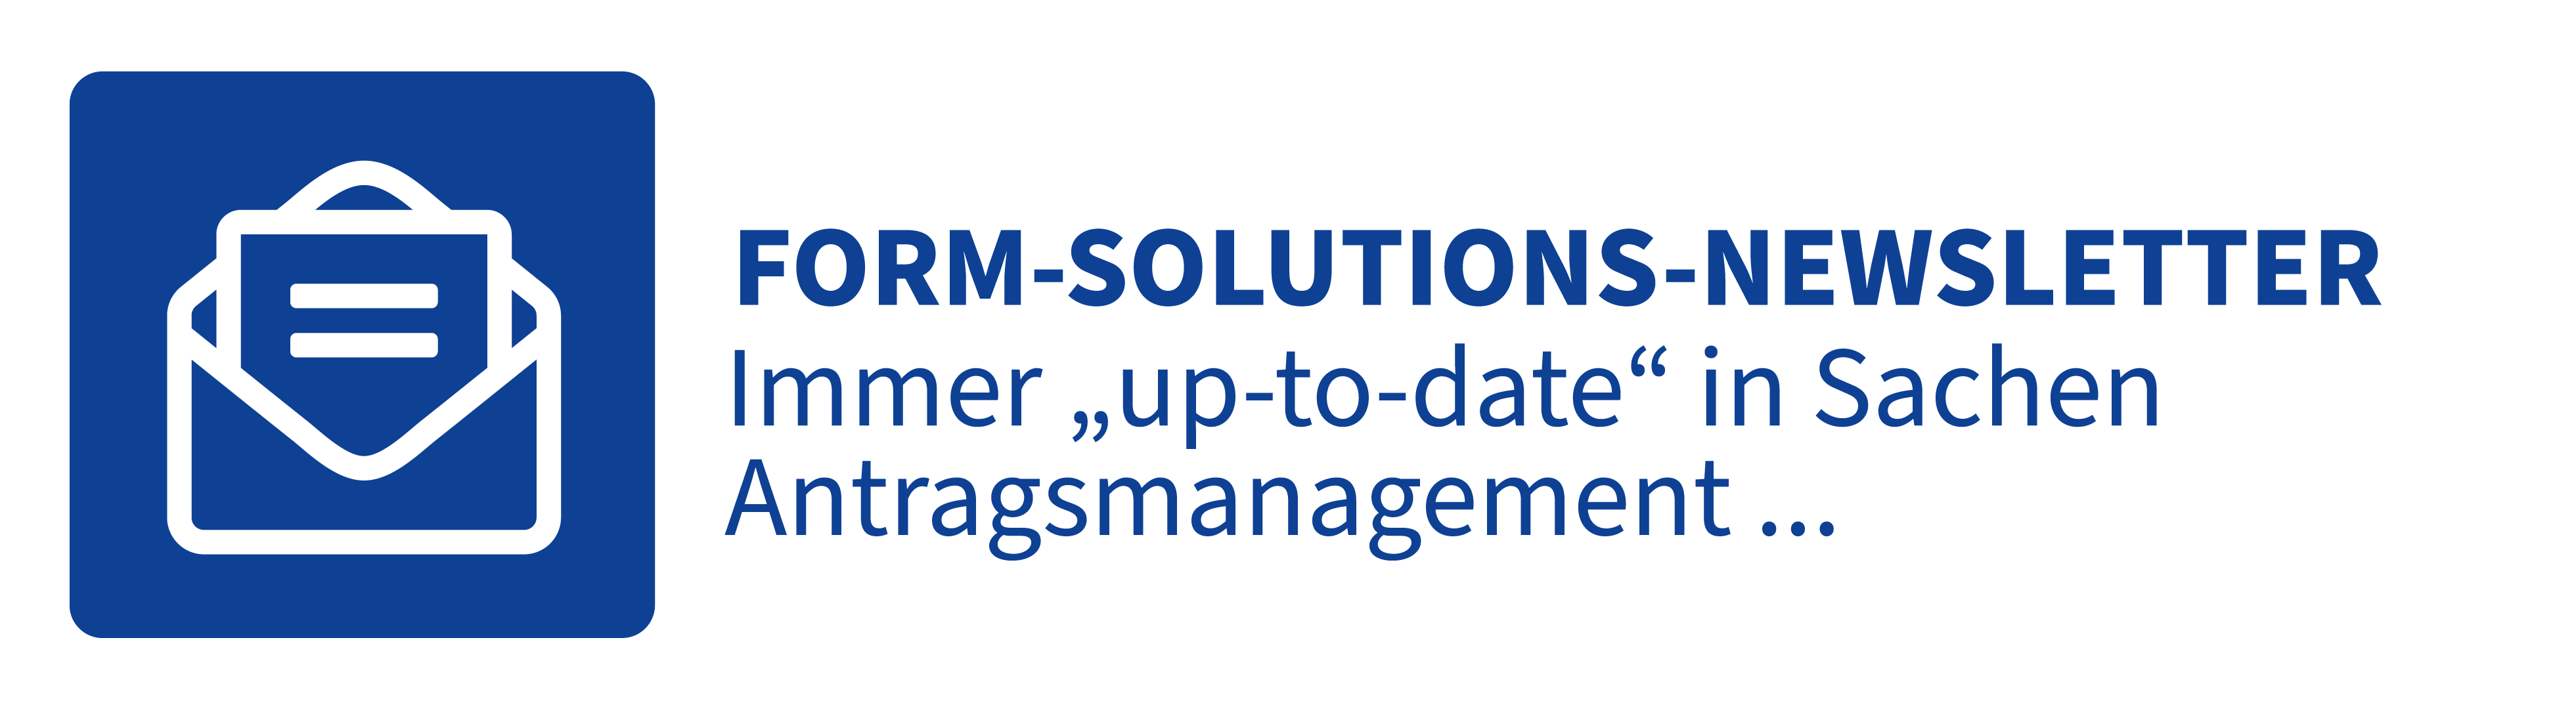 Form-Solutions Newsletter